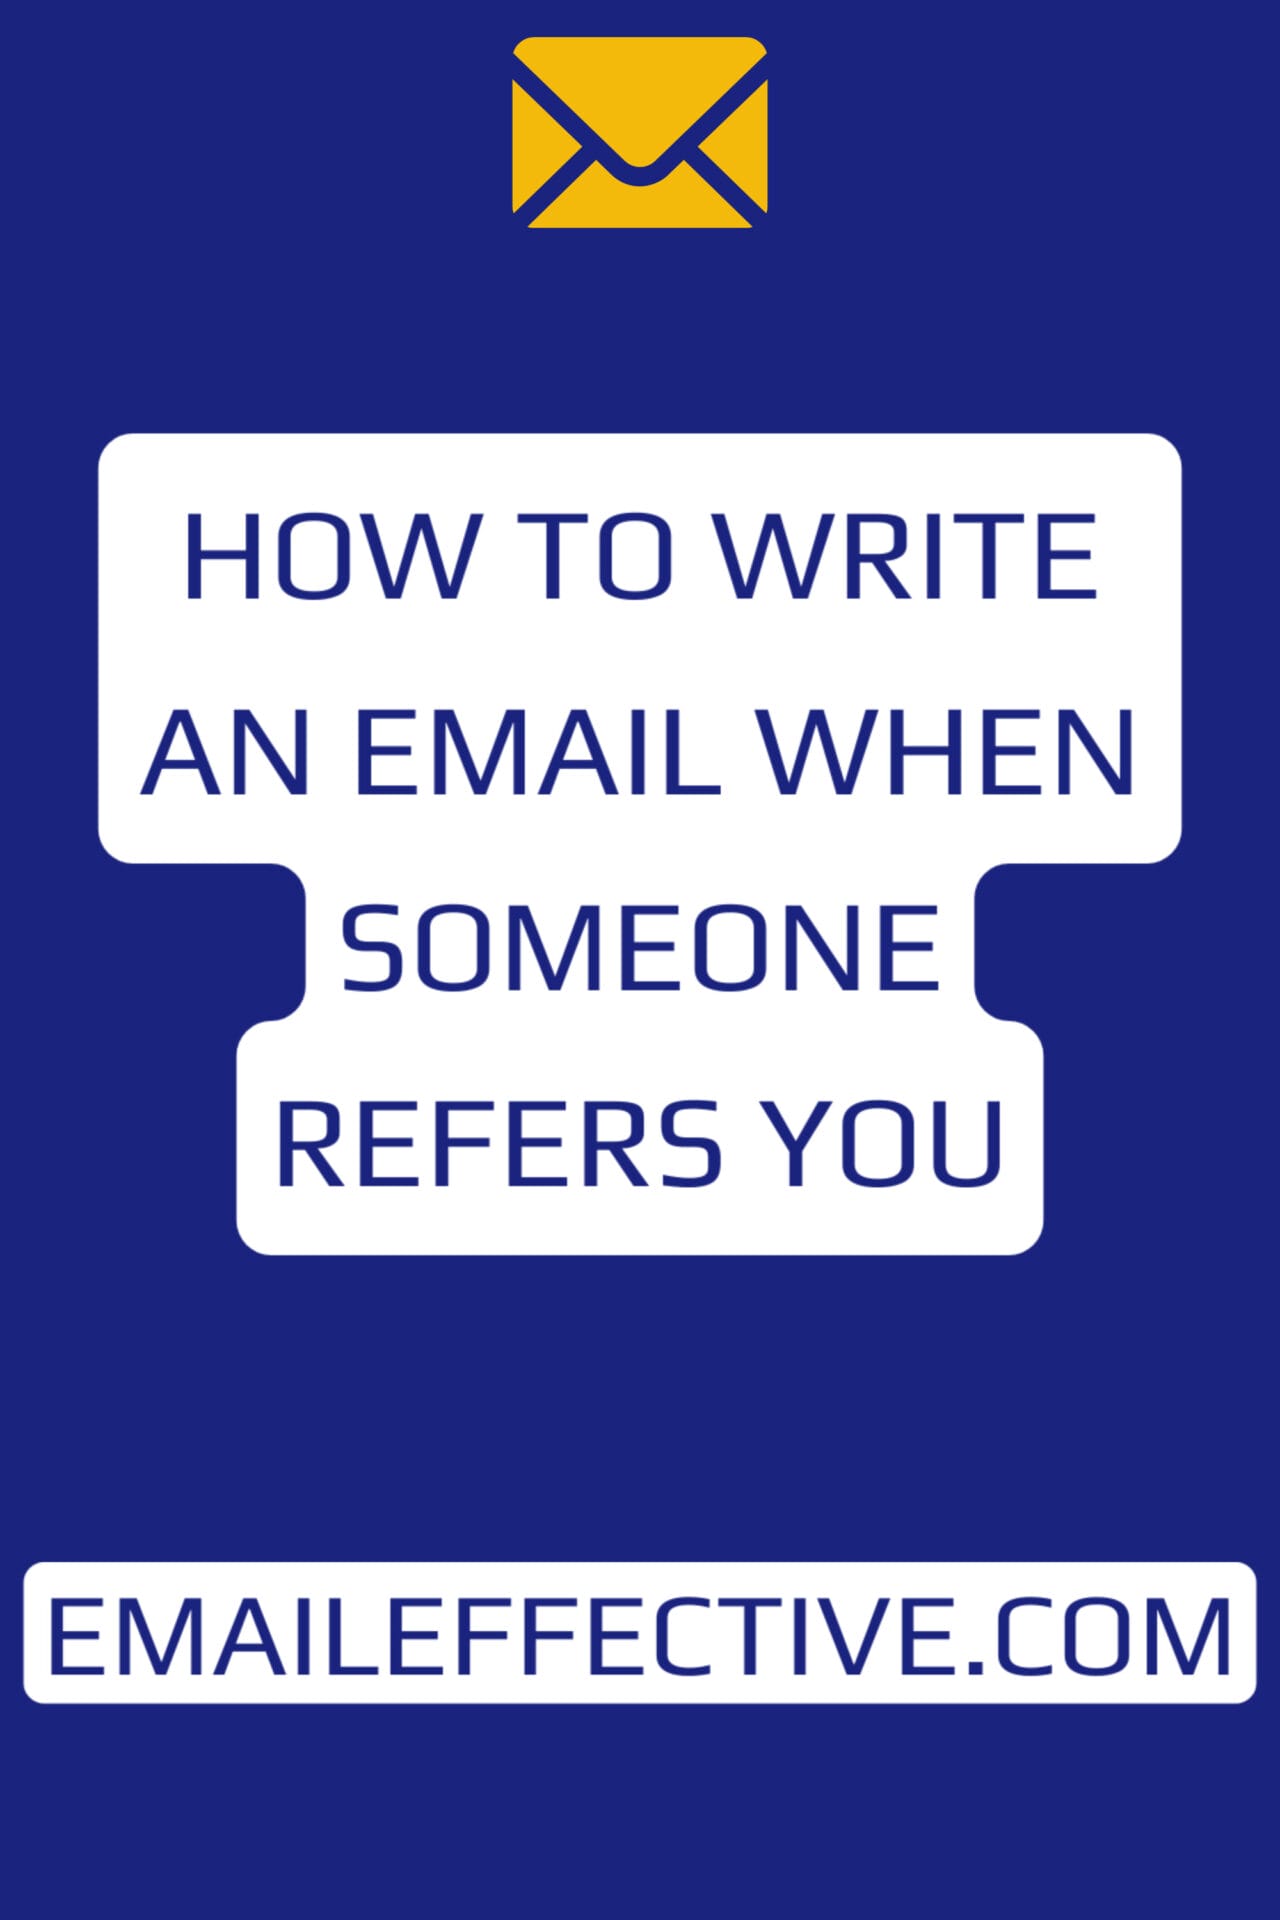 How to Write an Email when Someone Refers You